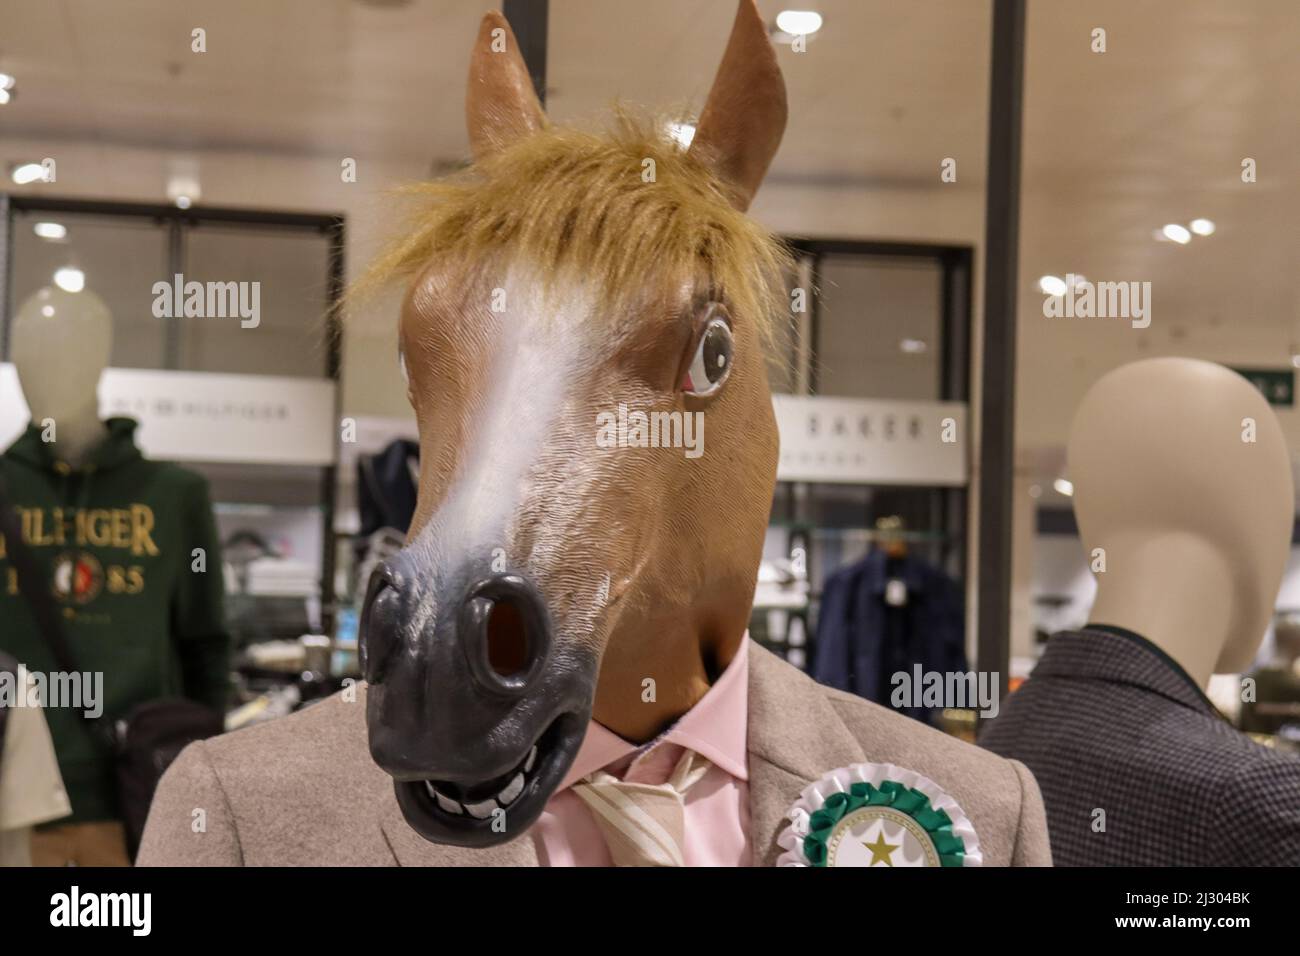 Horses head on a mannequin, in a menswear clothing department store Stock Photo